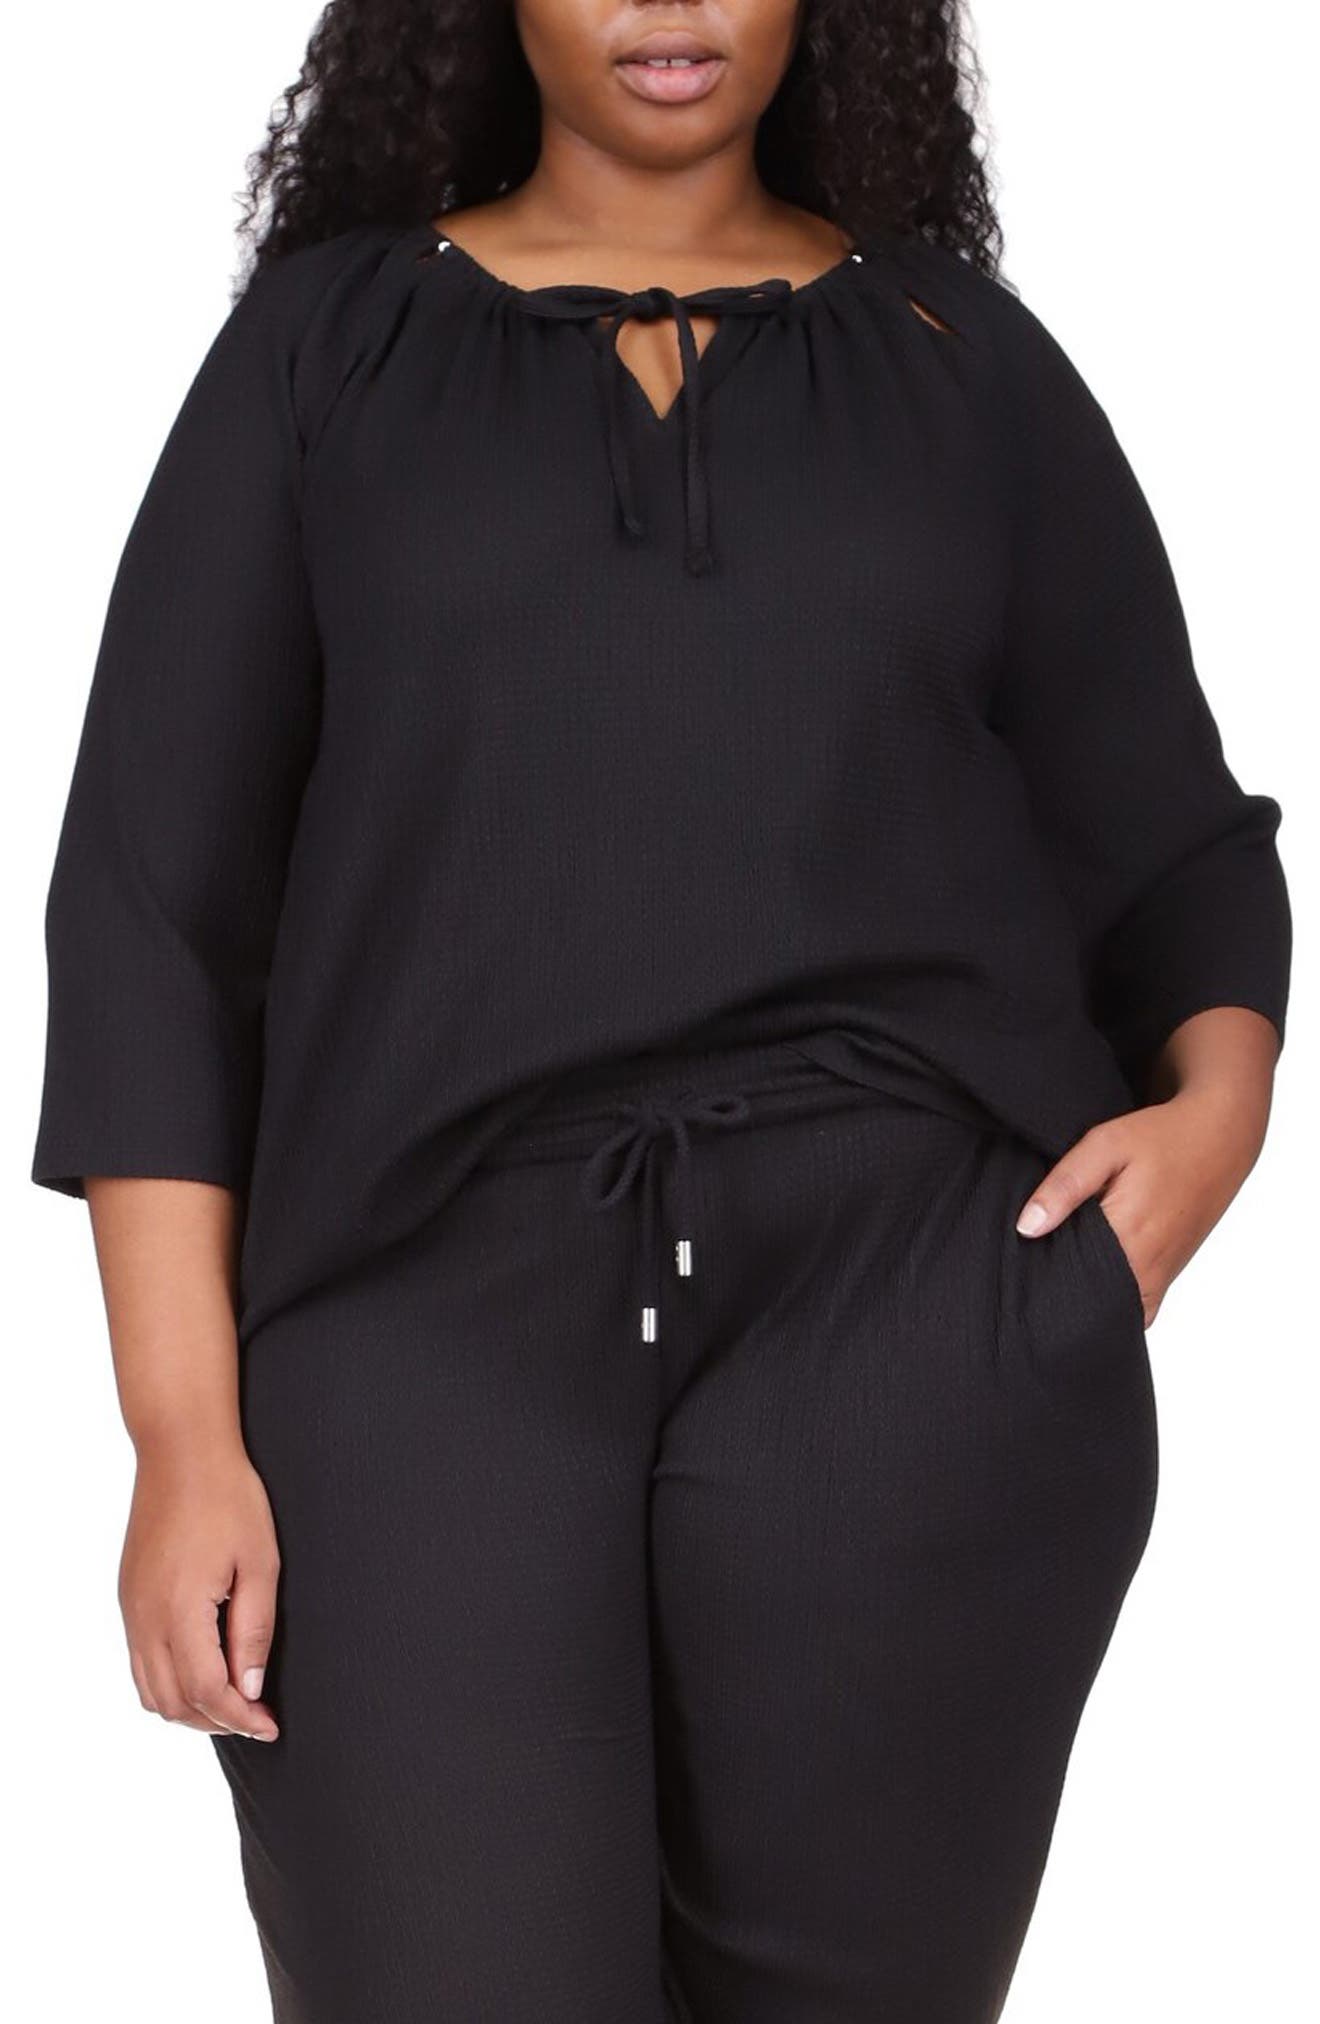 Michael Kors Cutout Crinkle Knit Top in Black at Nordstrom, Size 1X